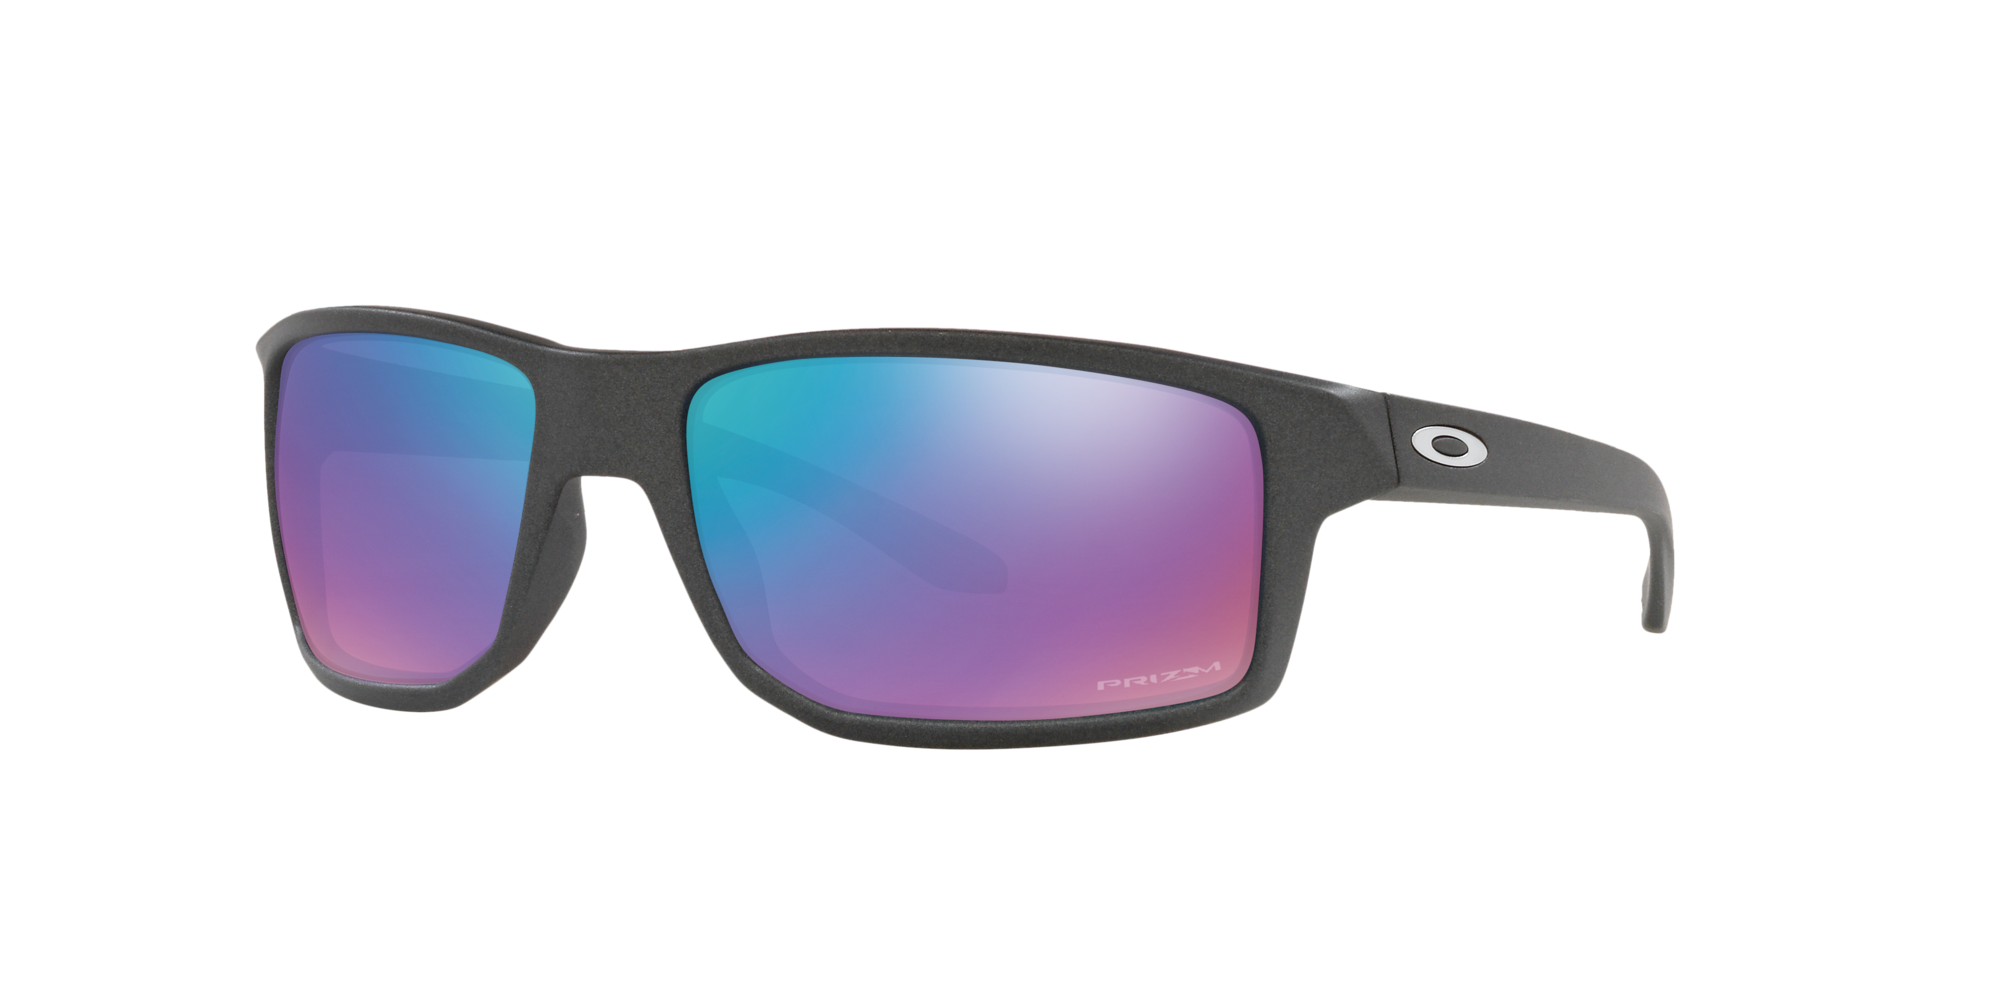 Oakley GIBSTON 9449 image number null